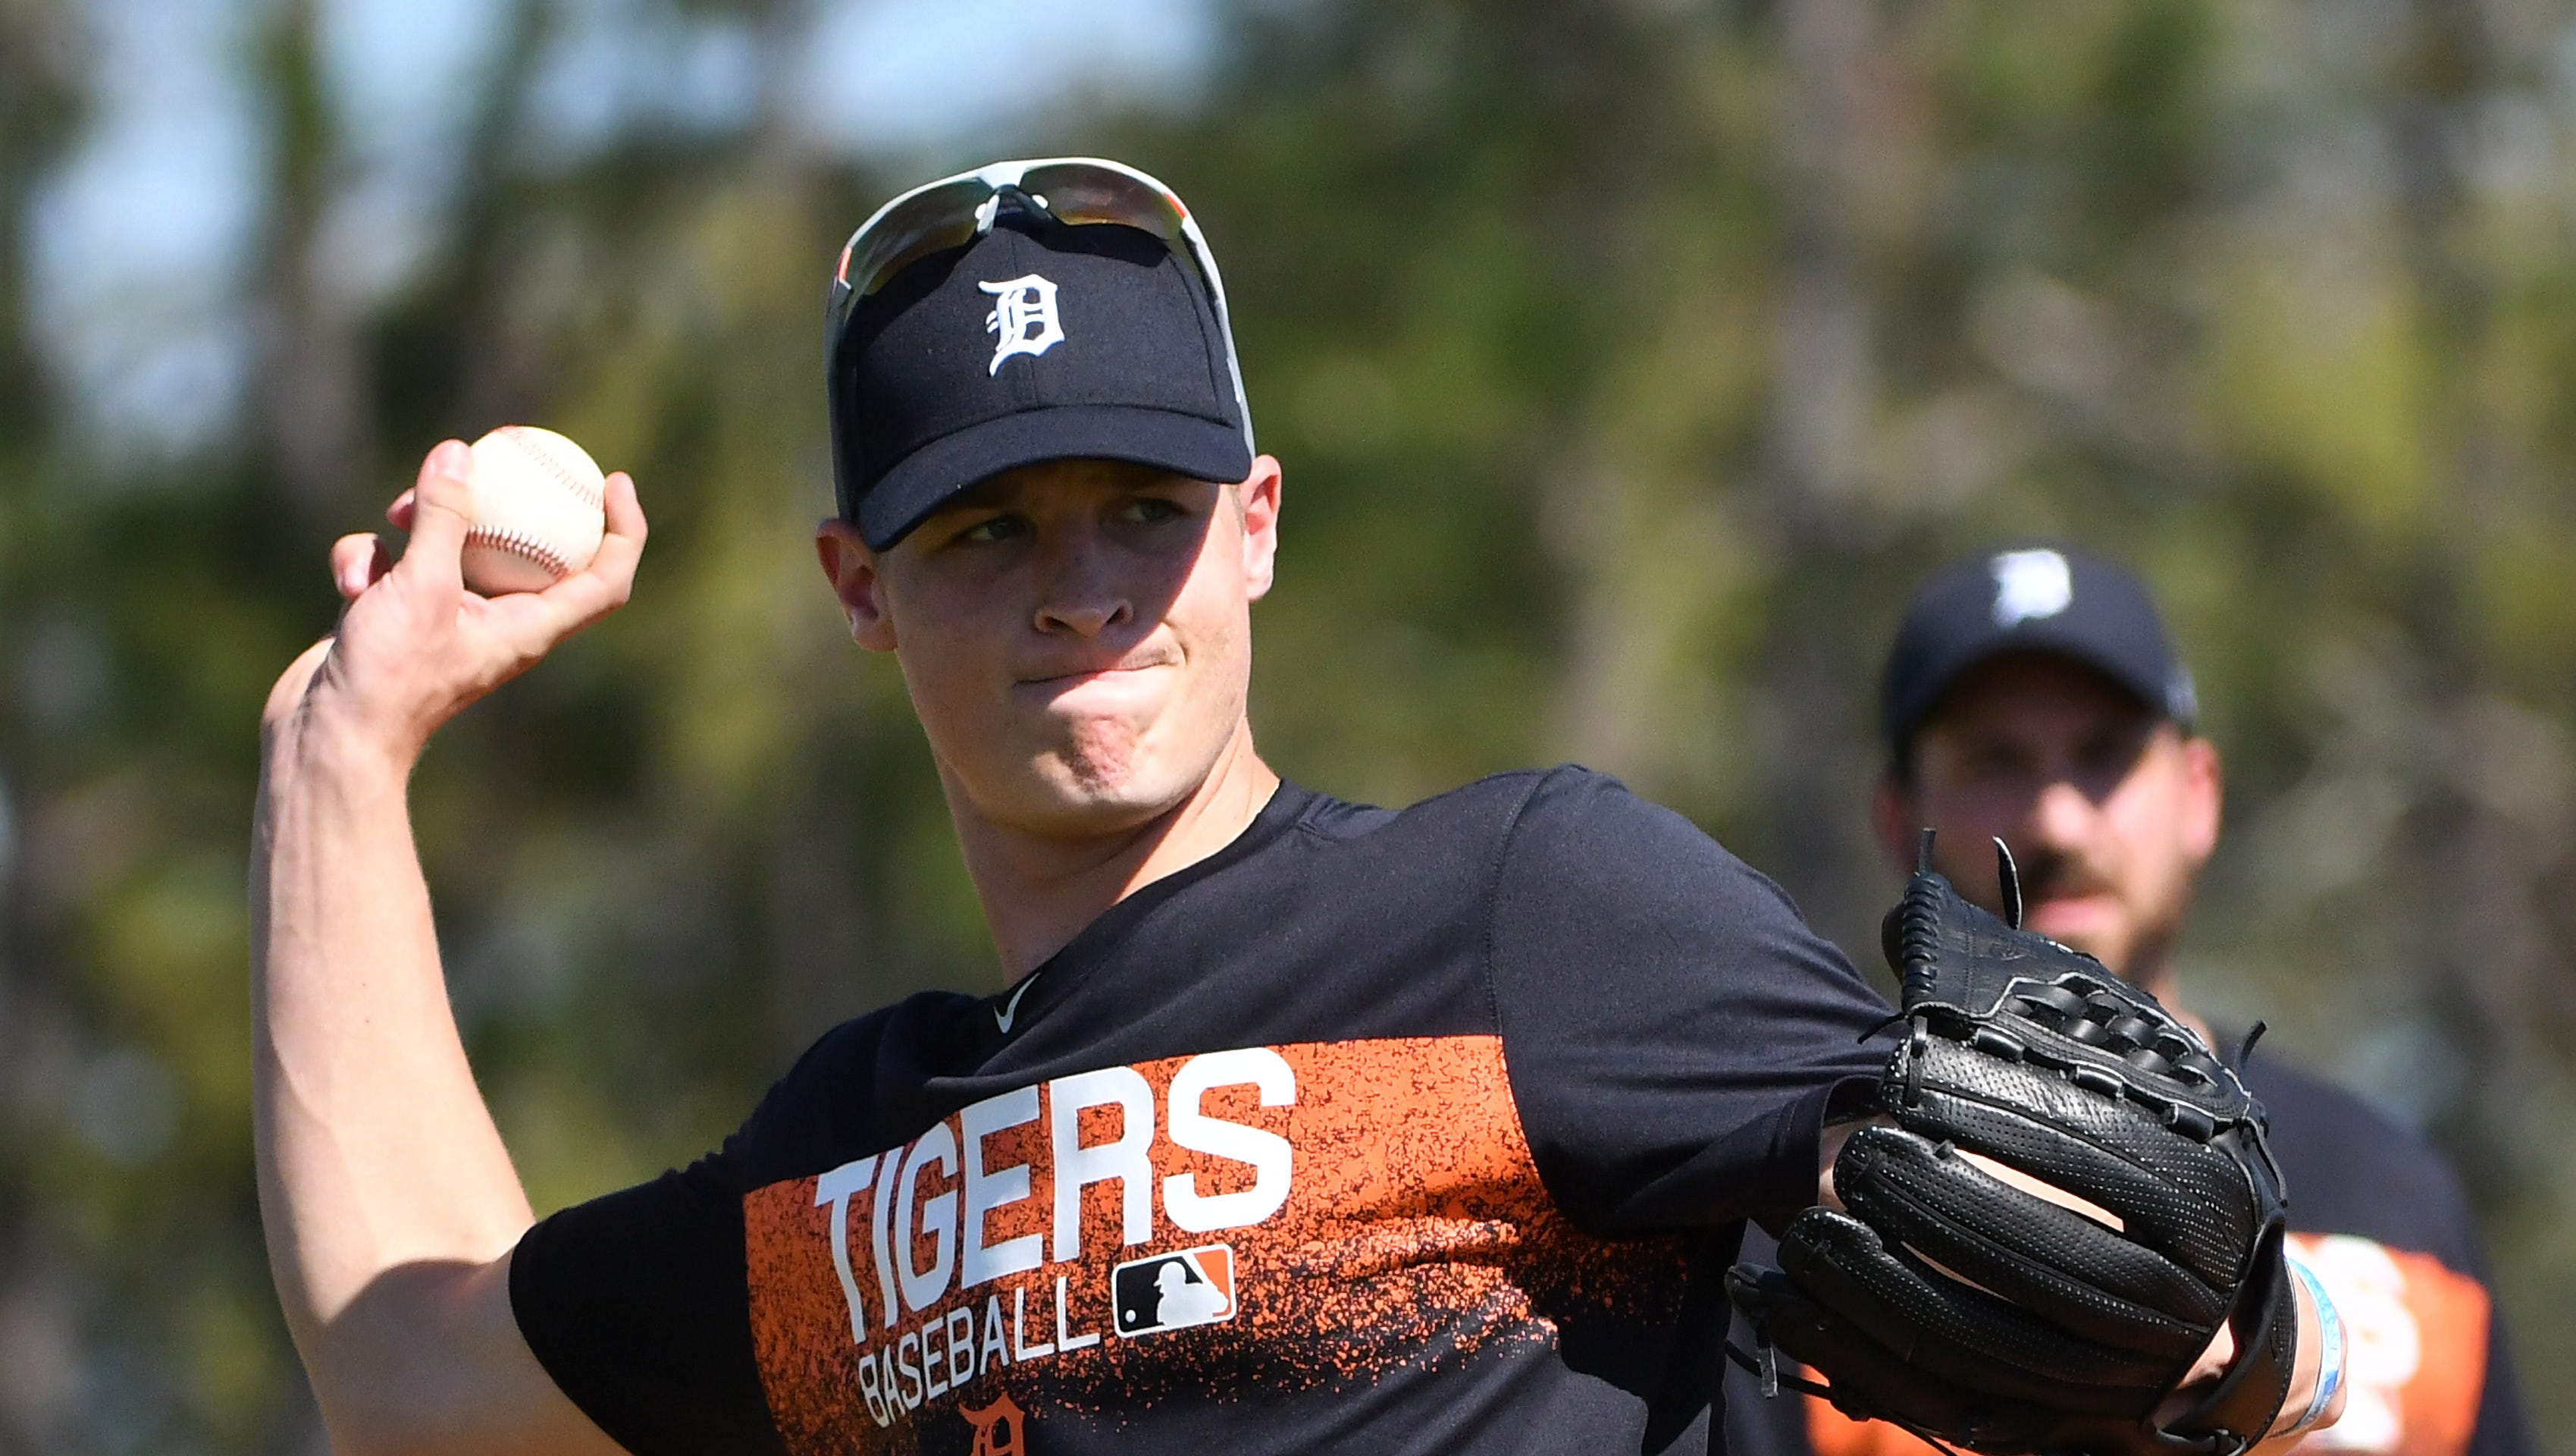 Tigers prospect Matt Manning has a 3.70 ERA with 68 strikeouts and 28 walks in 48.2 innings this season with Single-A West Michigan.